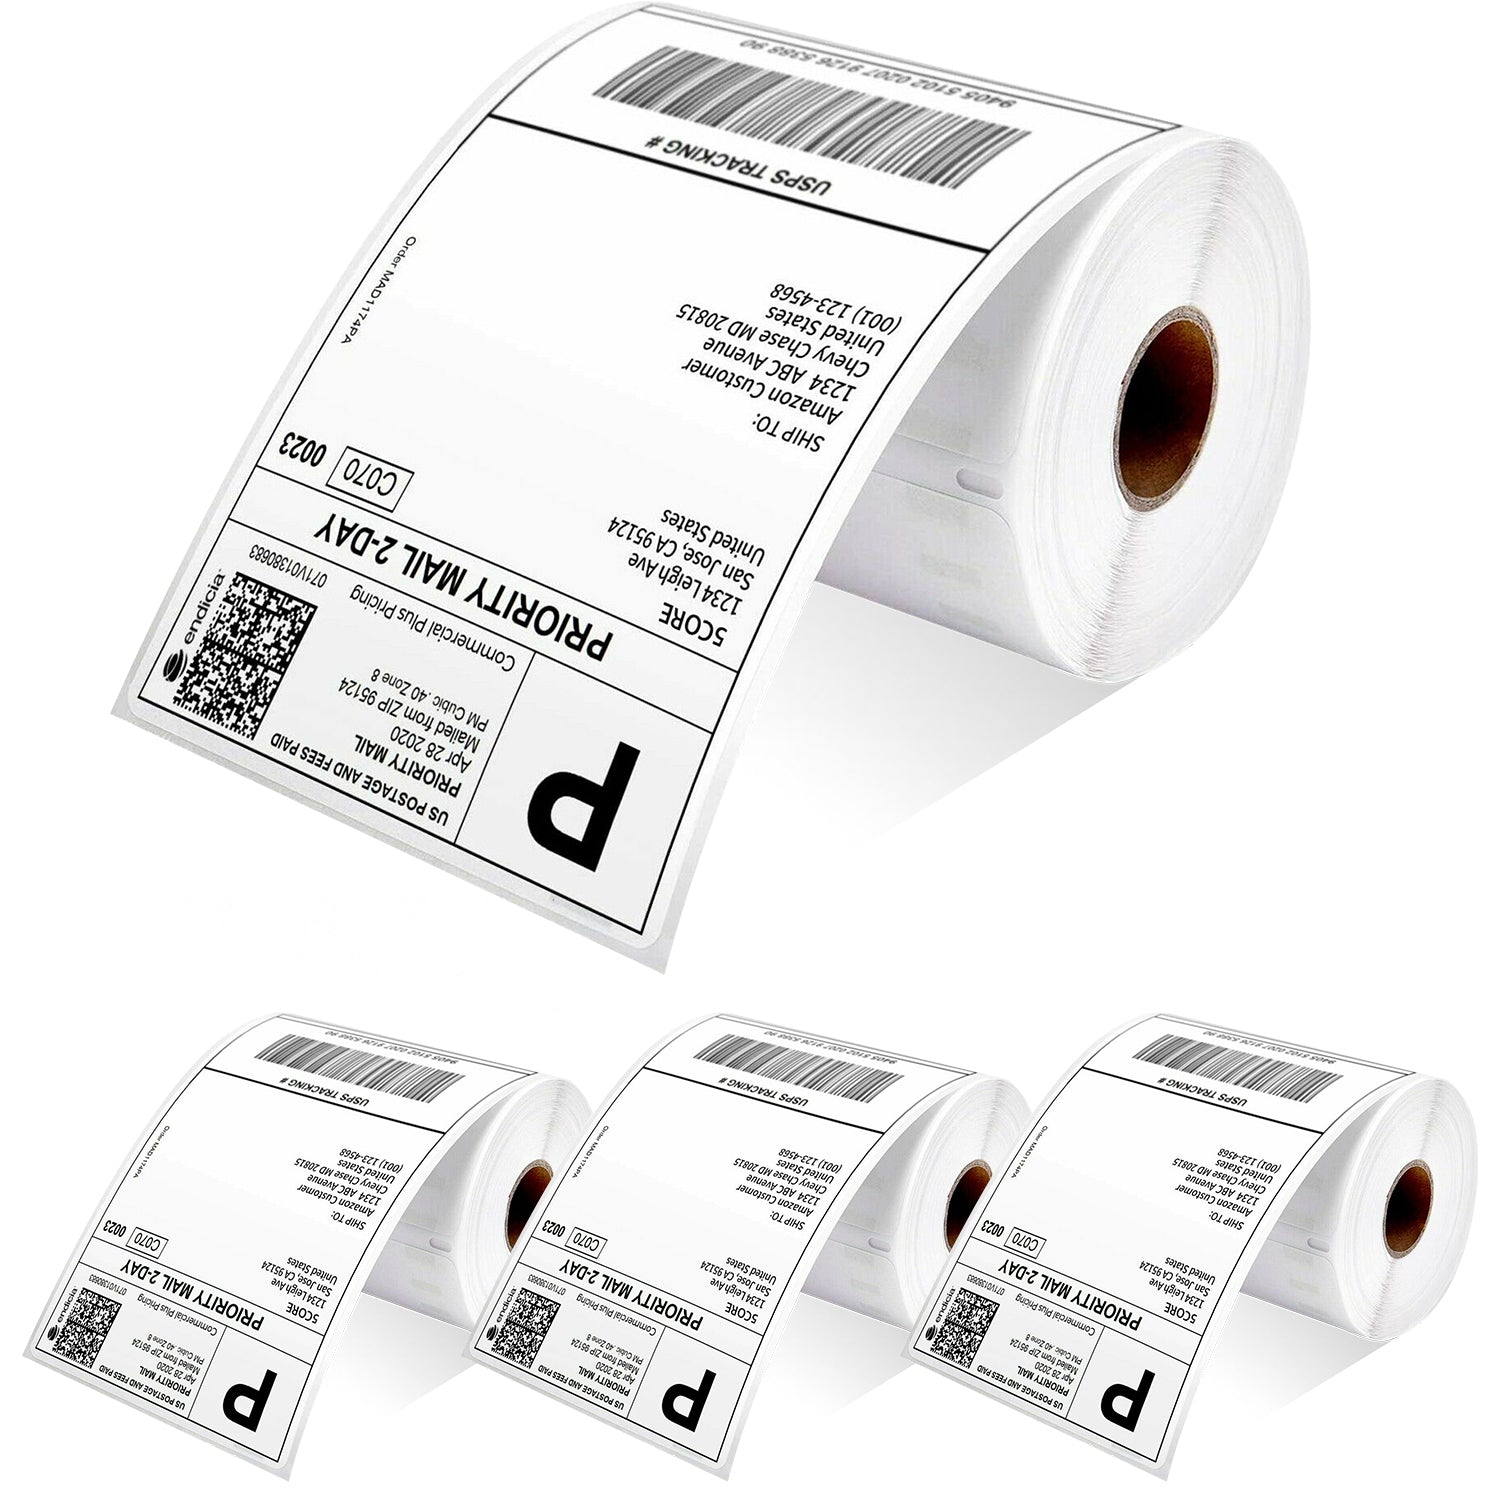 5 Core 4x6" Thermal Shipping Label Commercial Grade 4 Rolls Direct Labels 250/paper ZP450 Sticker